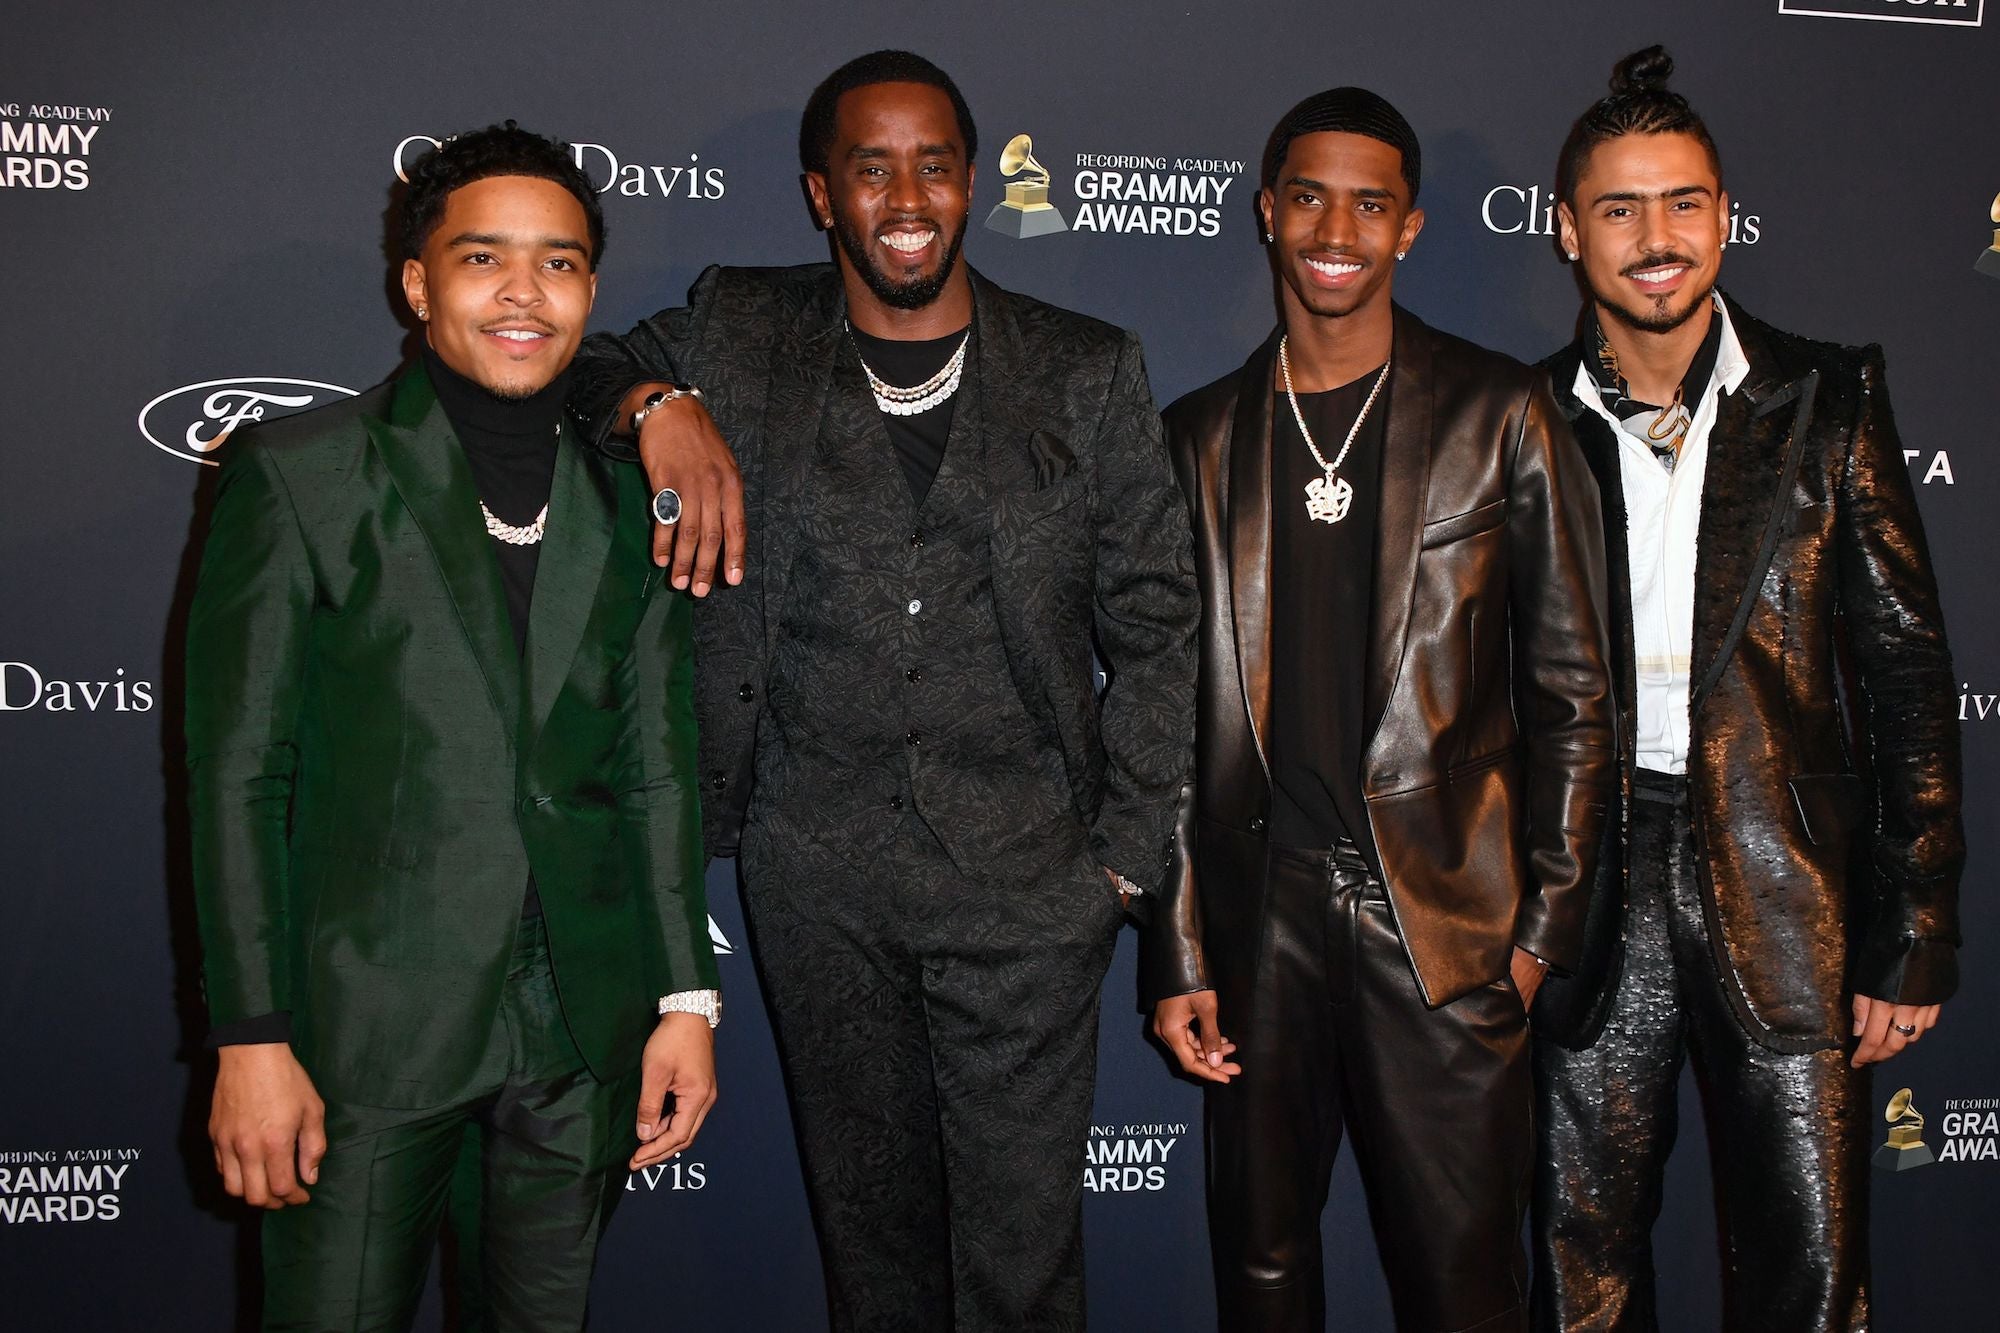 ‘Making The Band’ Taps Diddy’s Sons For Reboot And Announces Casting Tour Stops